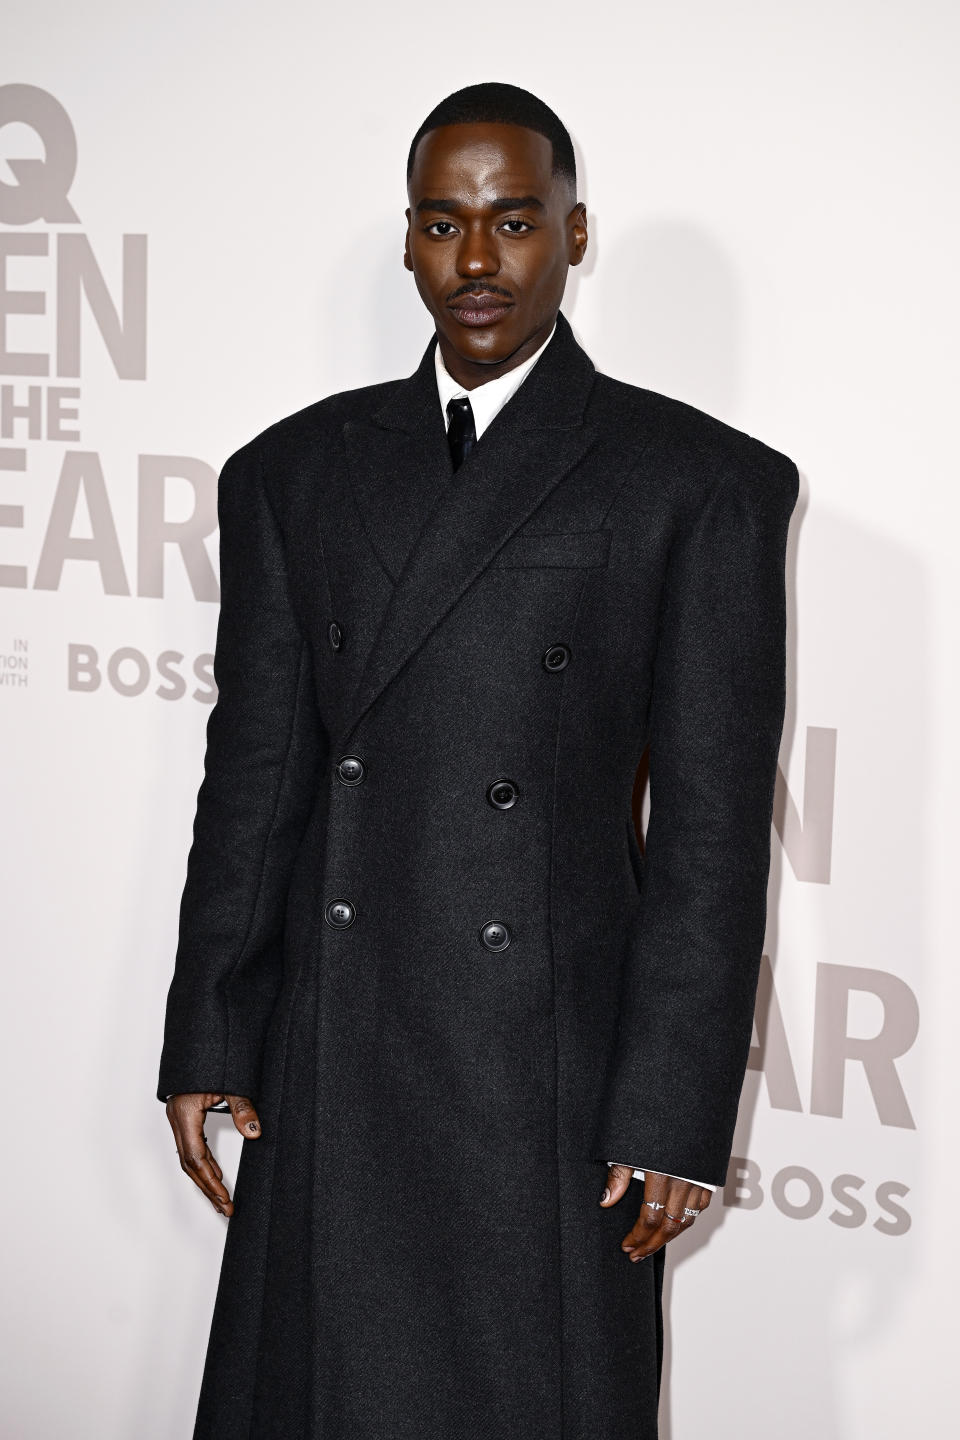 Ncuti Gatwa arrives at the GQ Men Of The Year Awards 2023 at The Royal Opera House on November 15, 2023 in London, England.